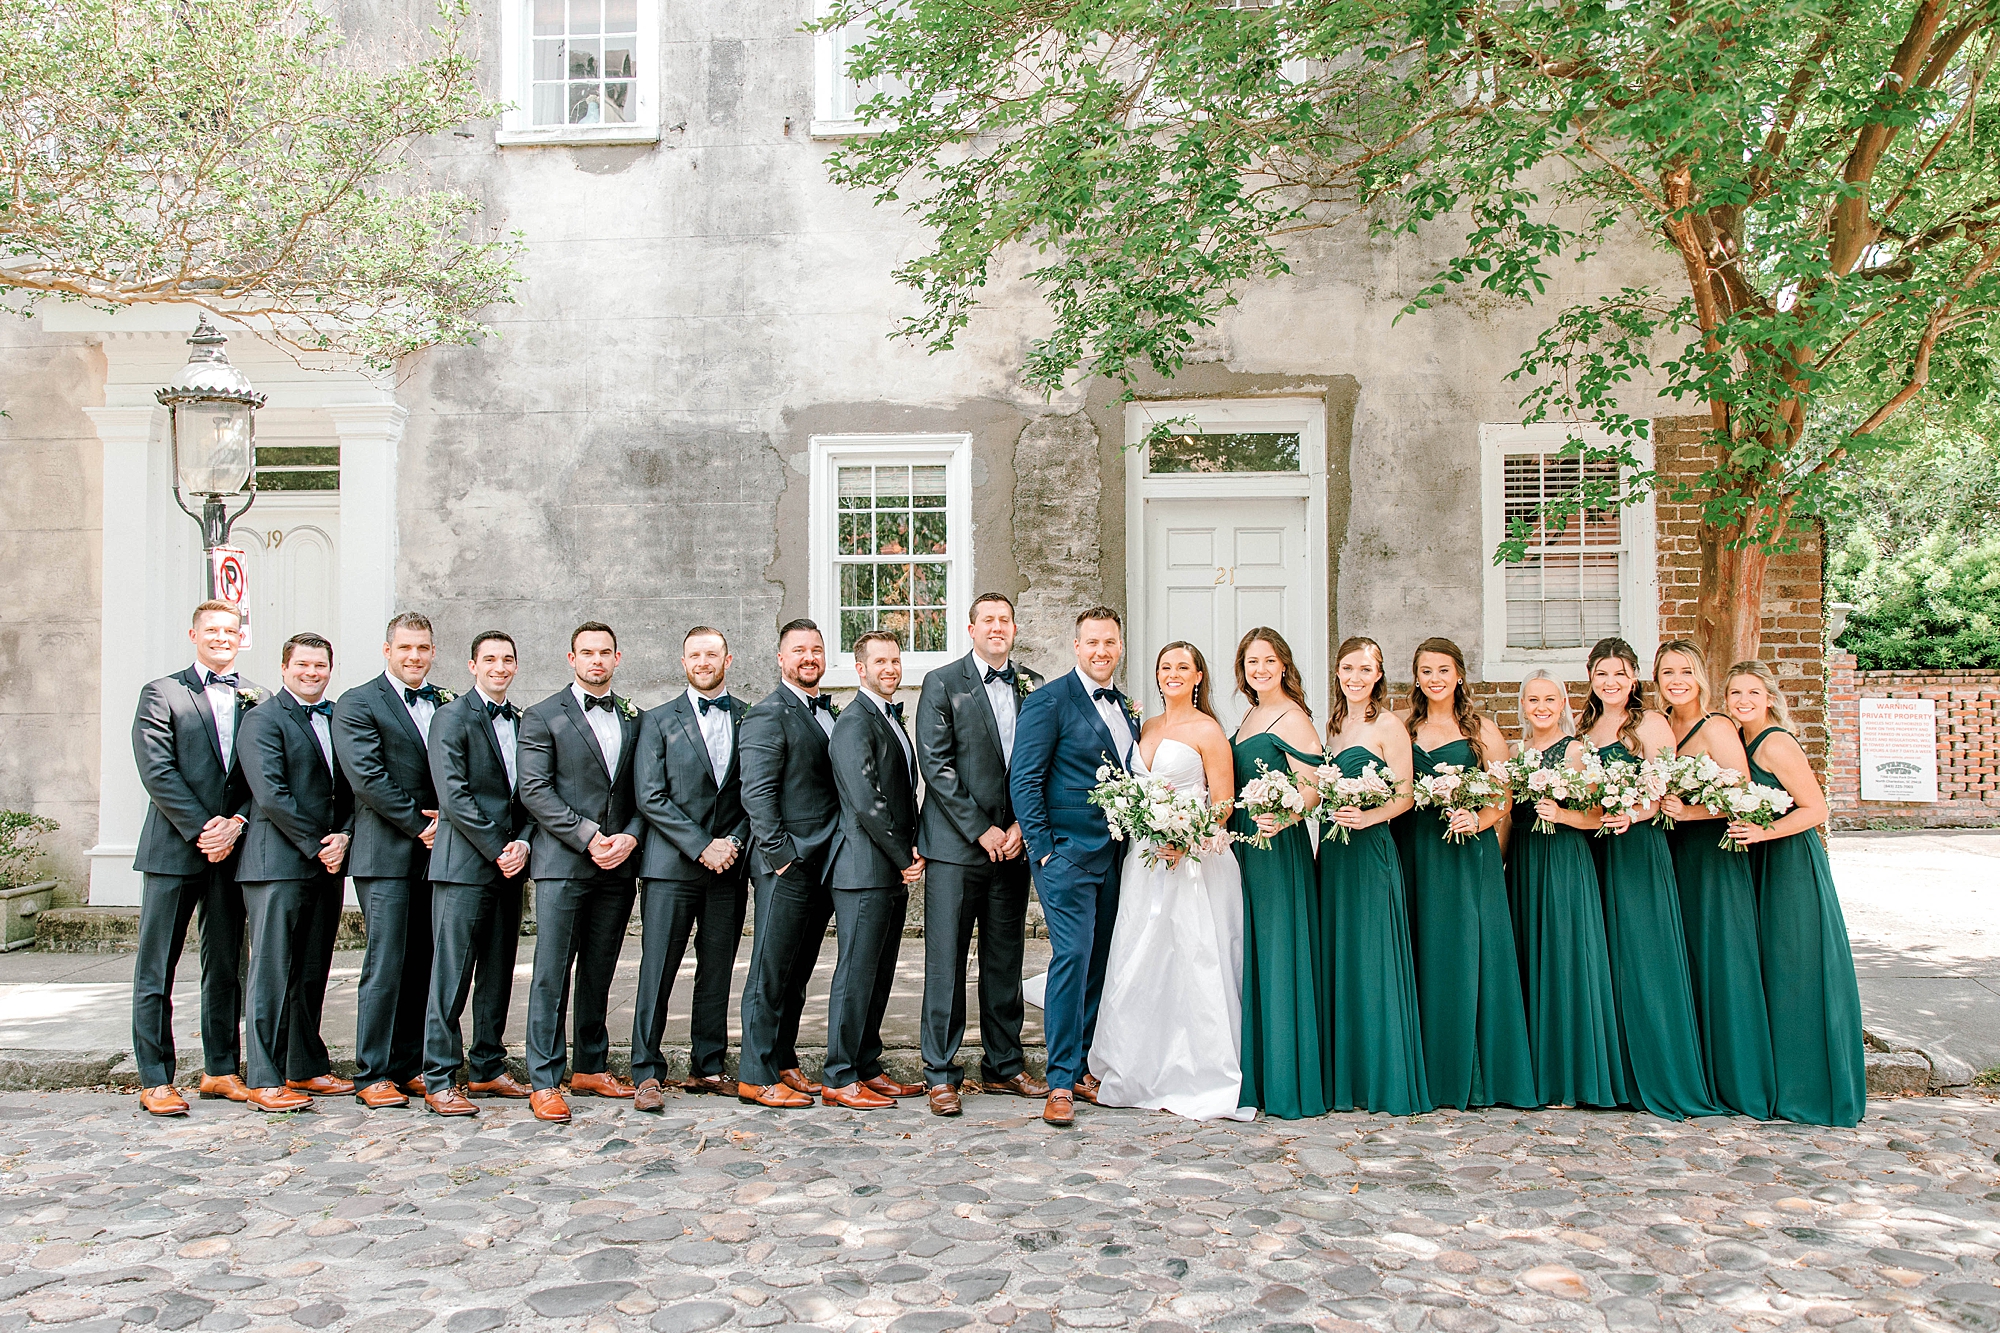 bride and groom stand with bridesmaids in green dresses and groomsmen in navy suits 